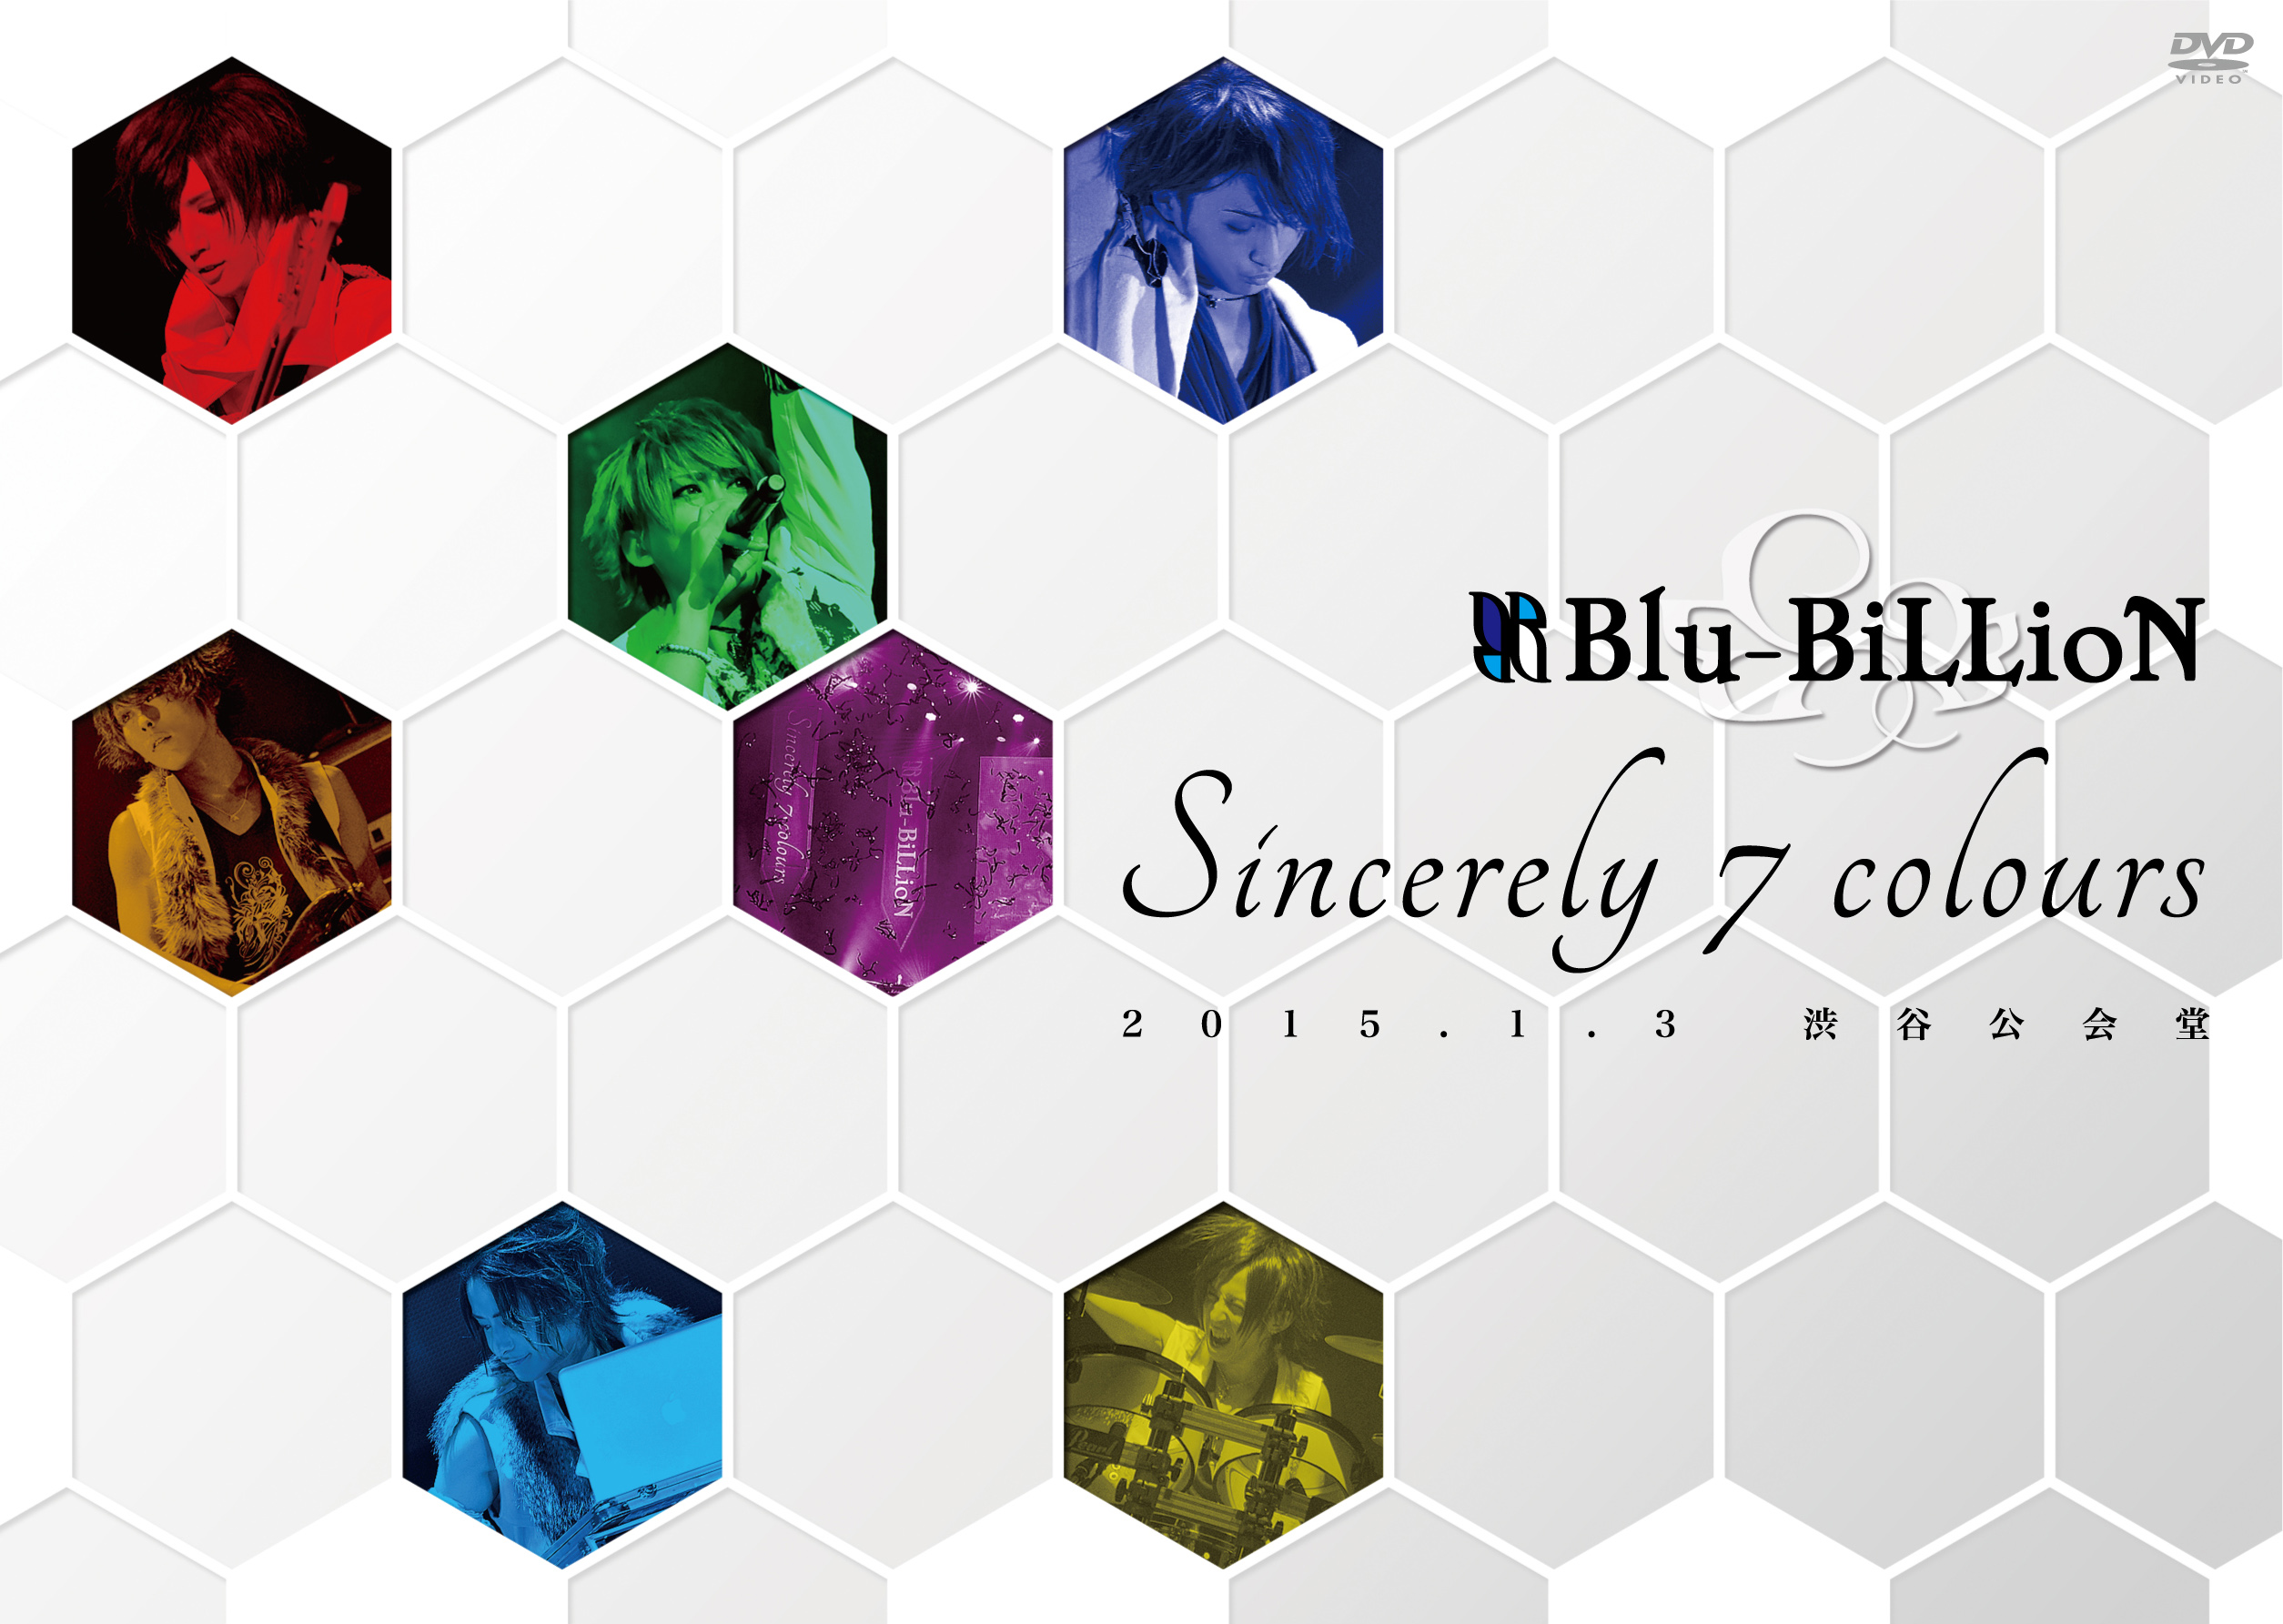 「Sincerely 7 colours」2015.1.3 渋谷公会堂